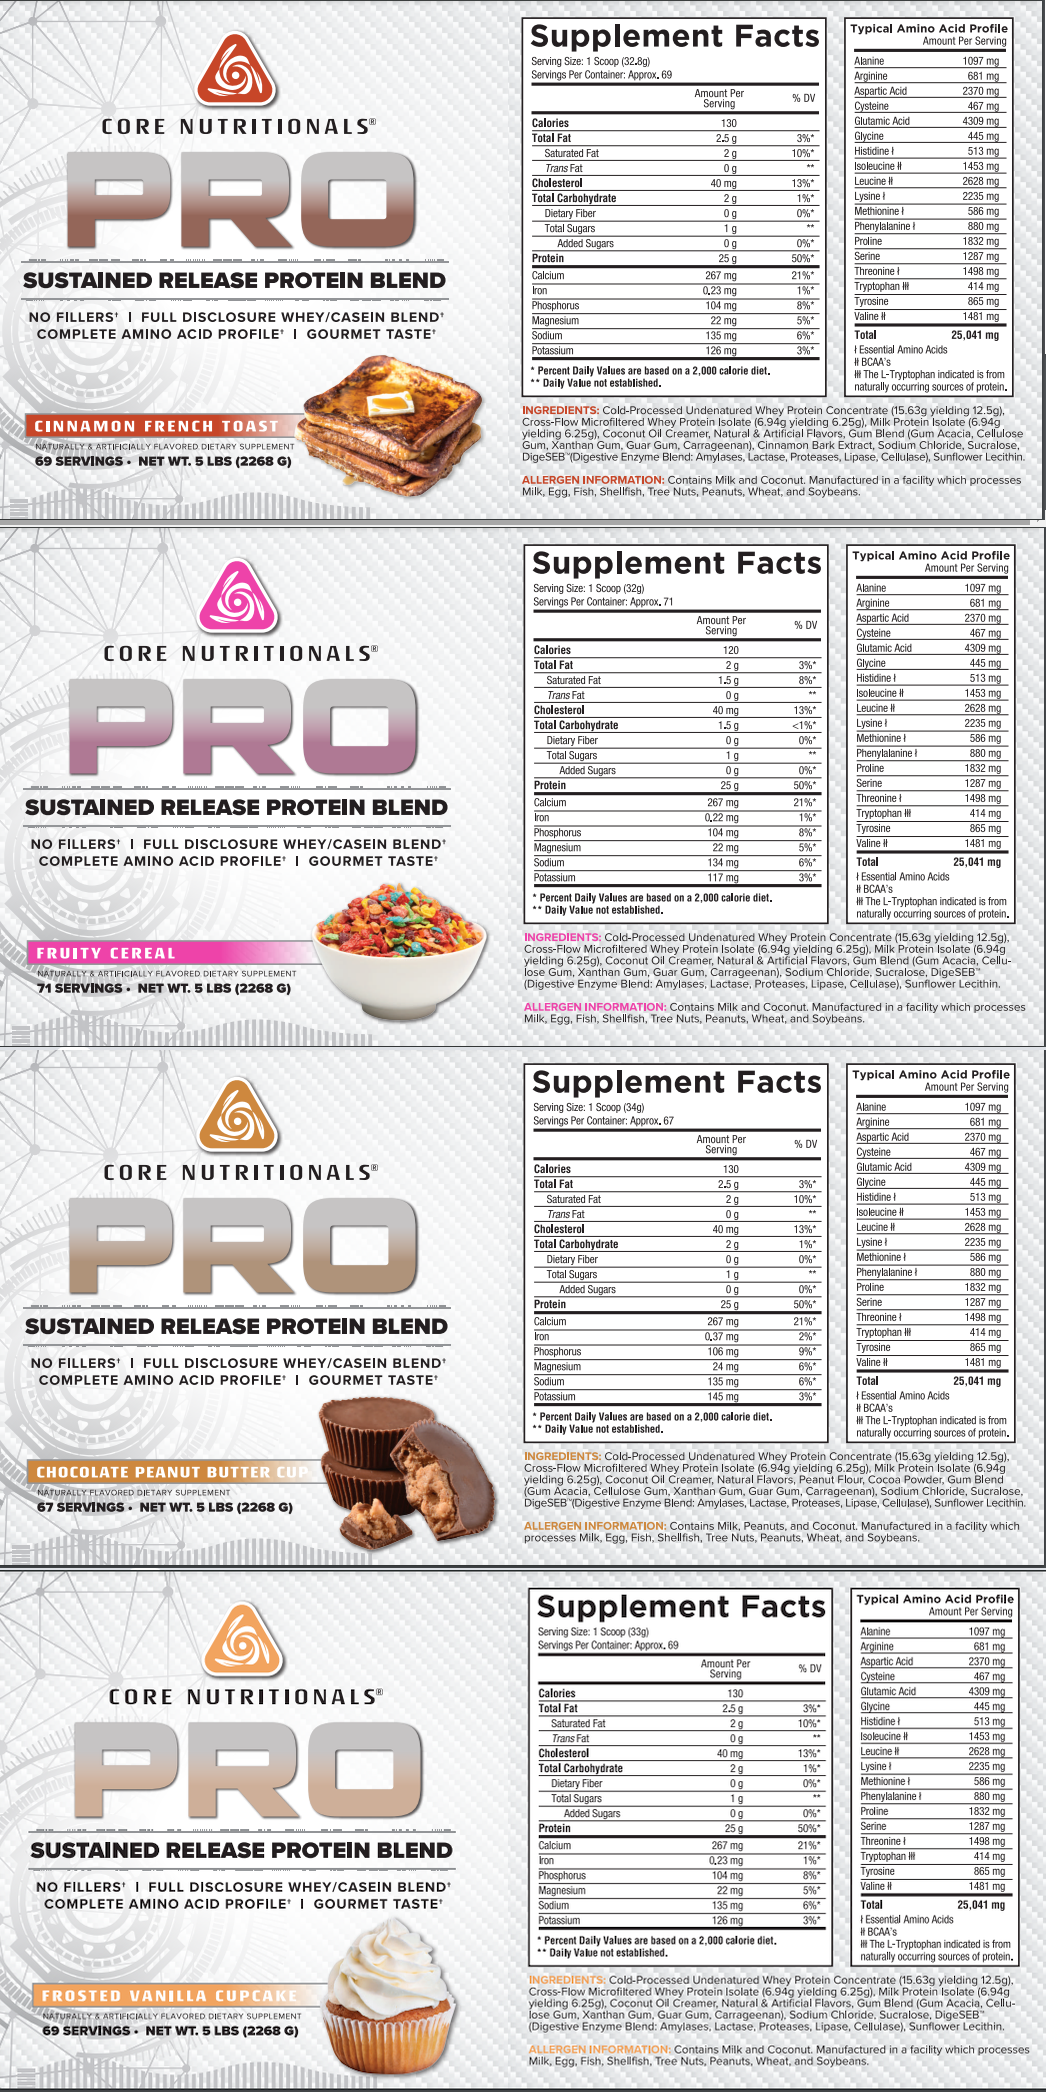 Core Nutritionals offers a range of flavored dietary supplements. The protein blends are full disclosure, filler-free, and contain a complete amino acid profile. Flavors range from cinnamon french toast to frosted vanilla cupcake. Each 5 lb container yields approximately 67-71 servings. The supplements are both naturally and artificially flavored.